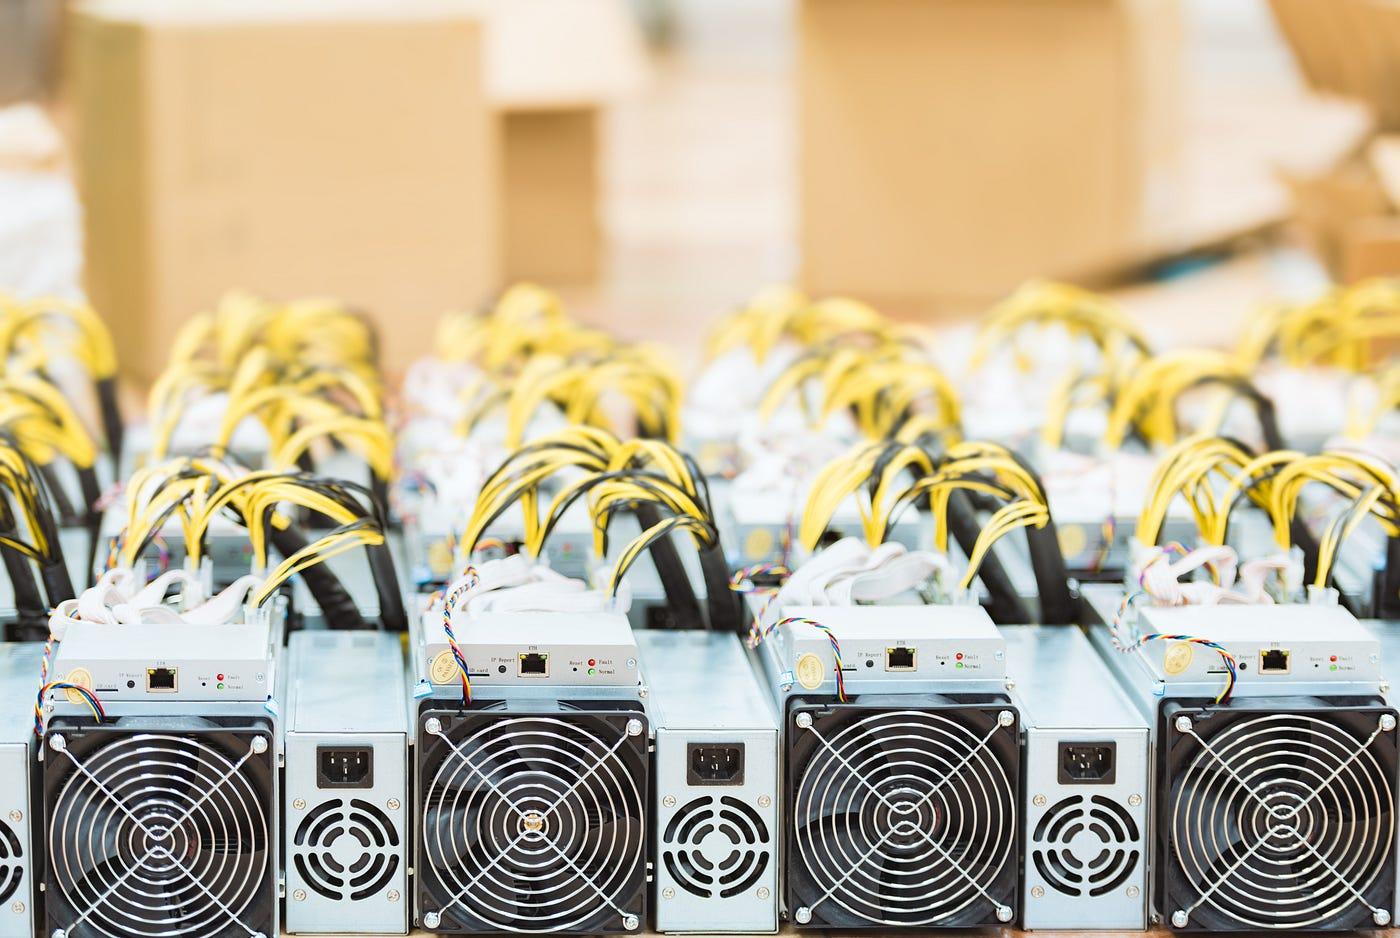 How to extend your ASIC miner's lifespan | Lumerin Blog